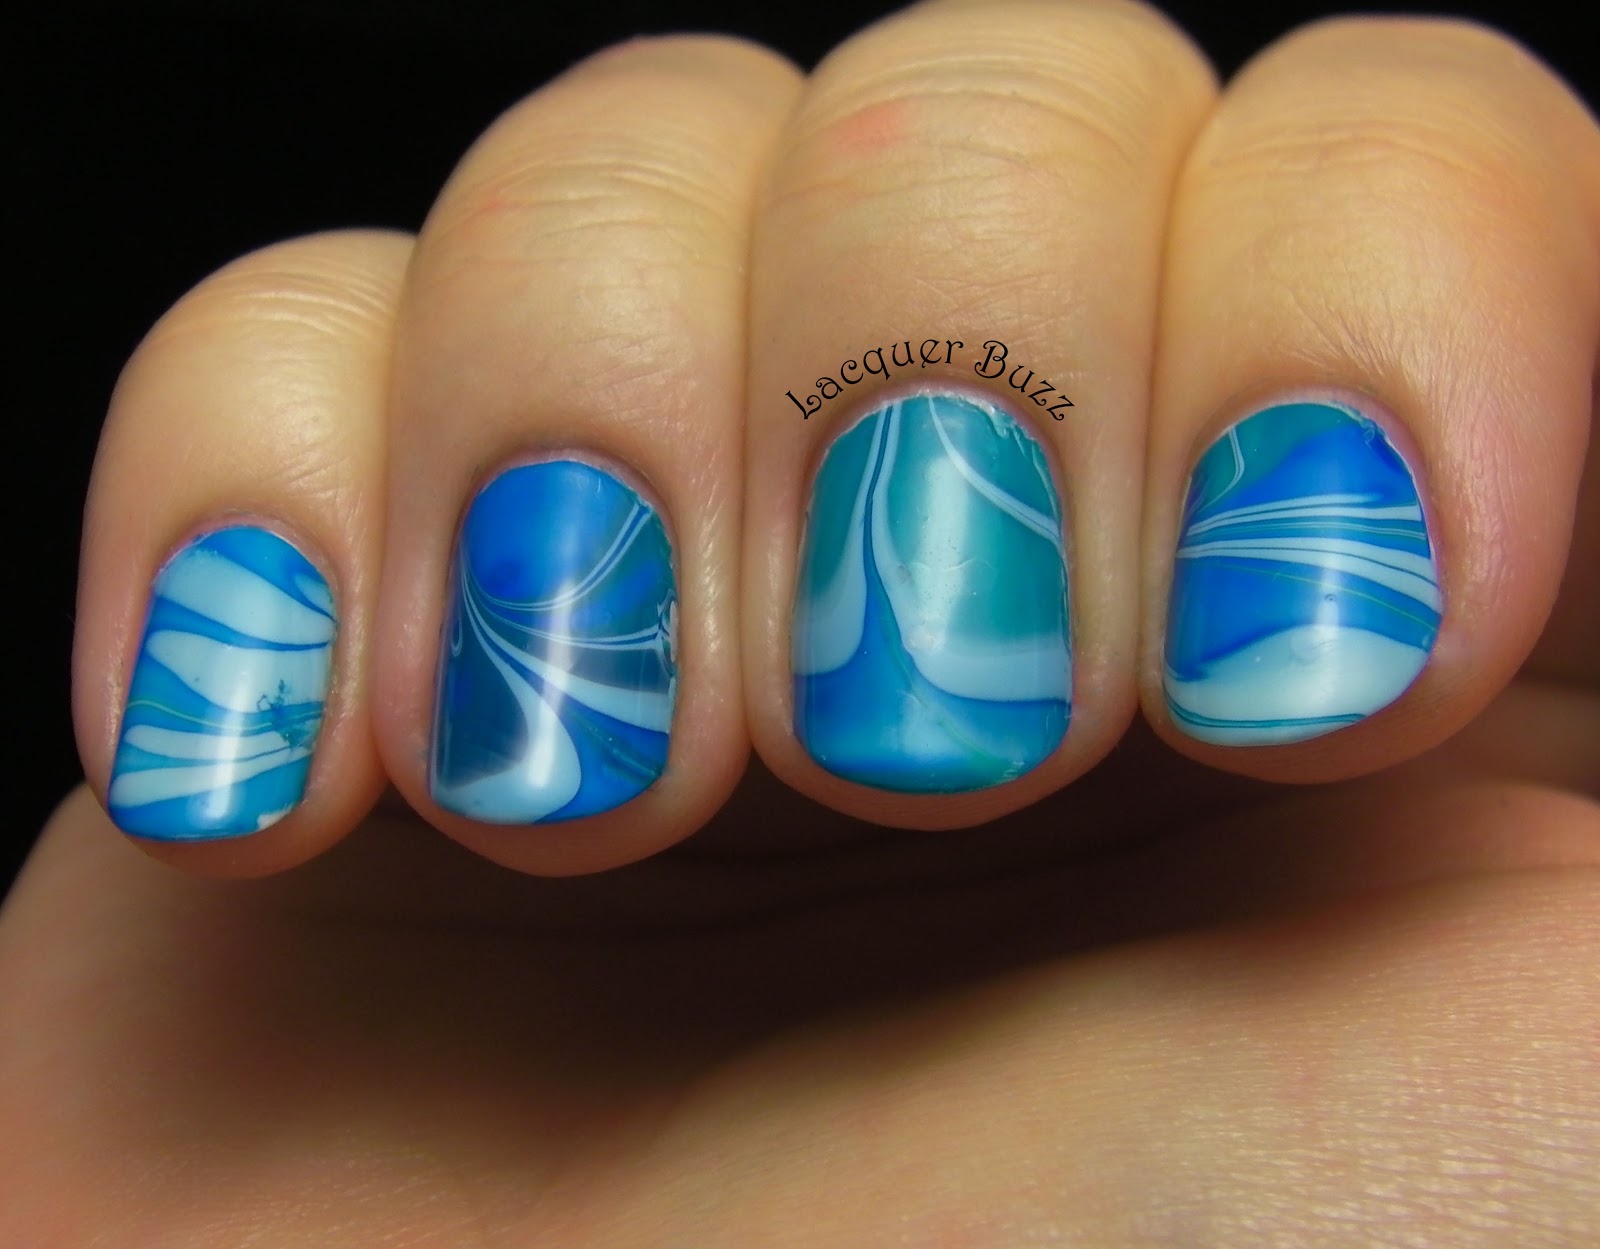 Lacquer Buzz: My first successful water marble